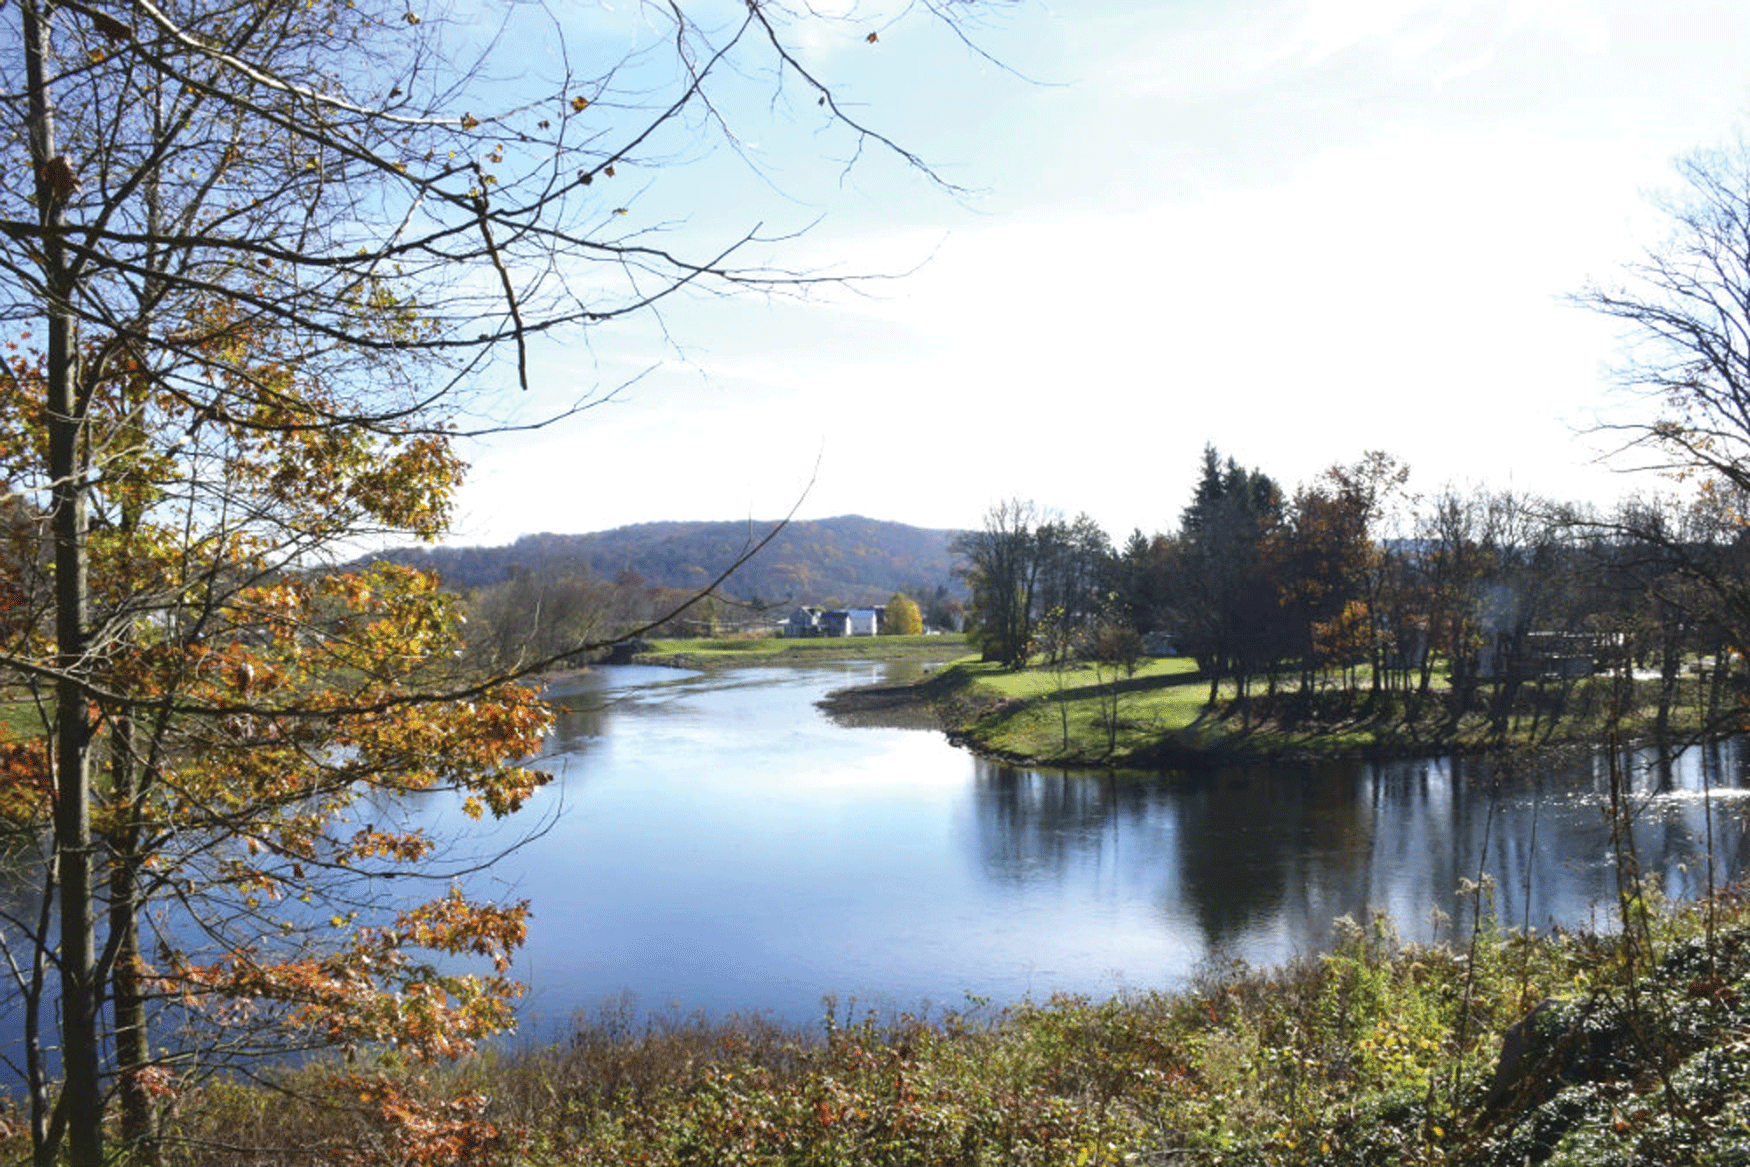 Landscape of the rivers surrounded by vegetation, including trees.